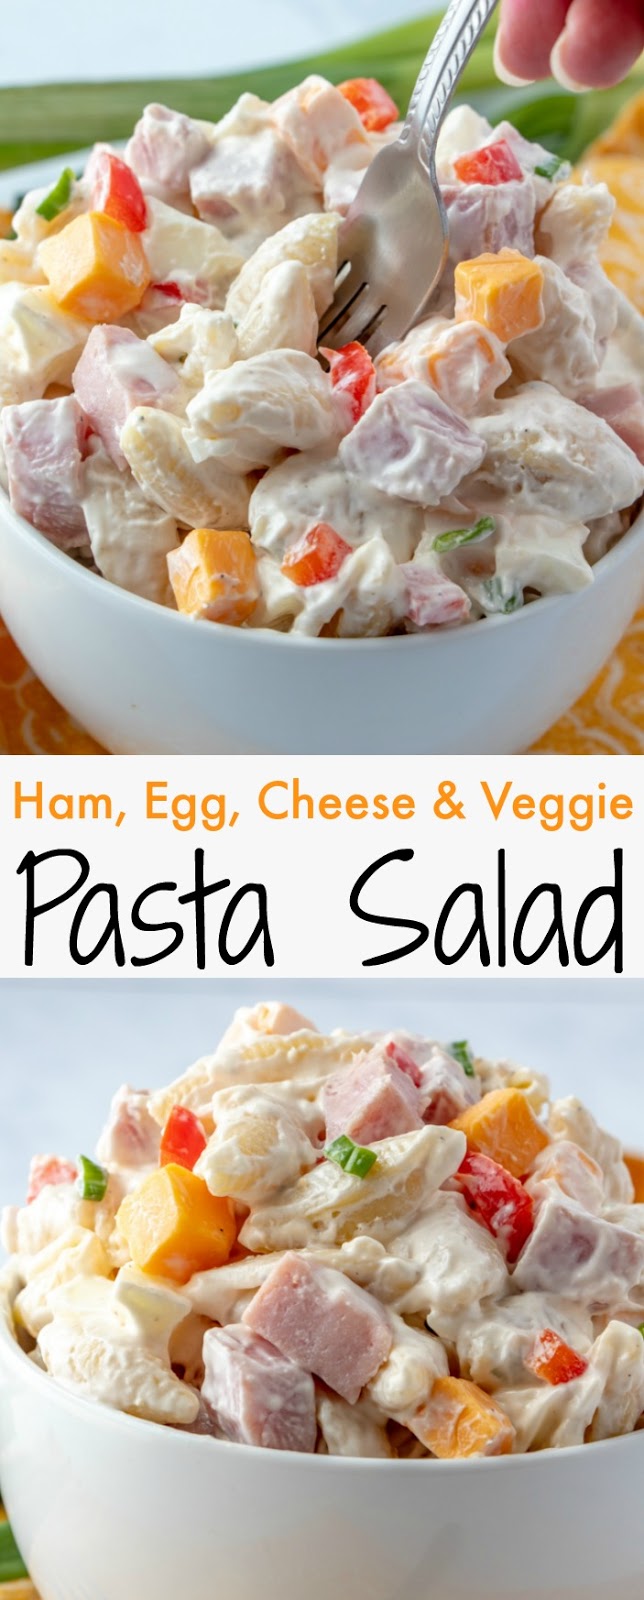 Perfect for any picnic, BBQ, potluck or event! This salad feeds a crowd and it's everyone's favorite! Great for using leftover Christmas or Easter Ham and hard boiled eggs!  Ham, Egg, Cheese and Veggie Pasta Salad Recipe